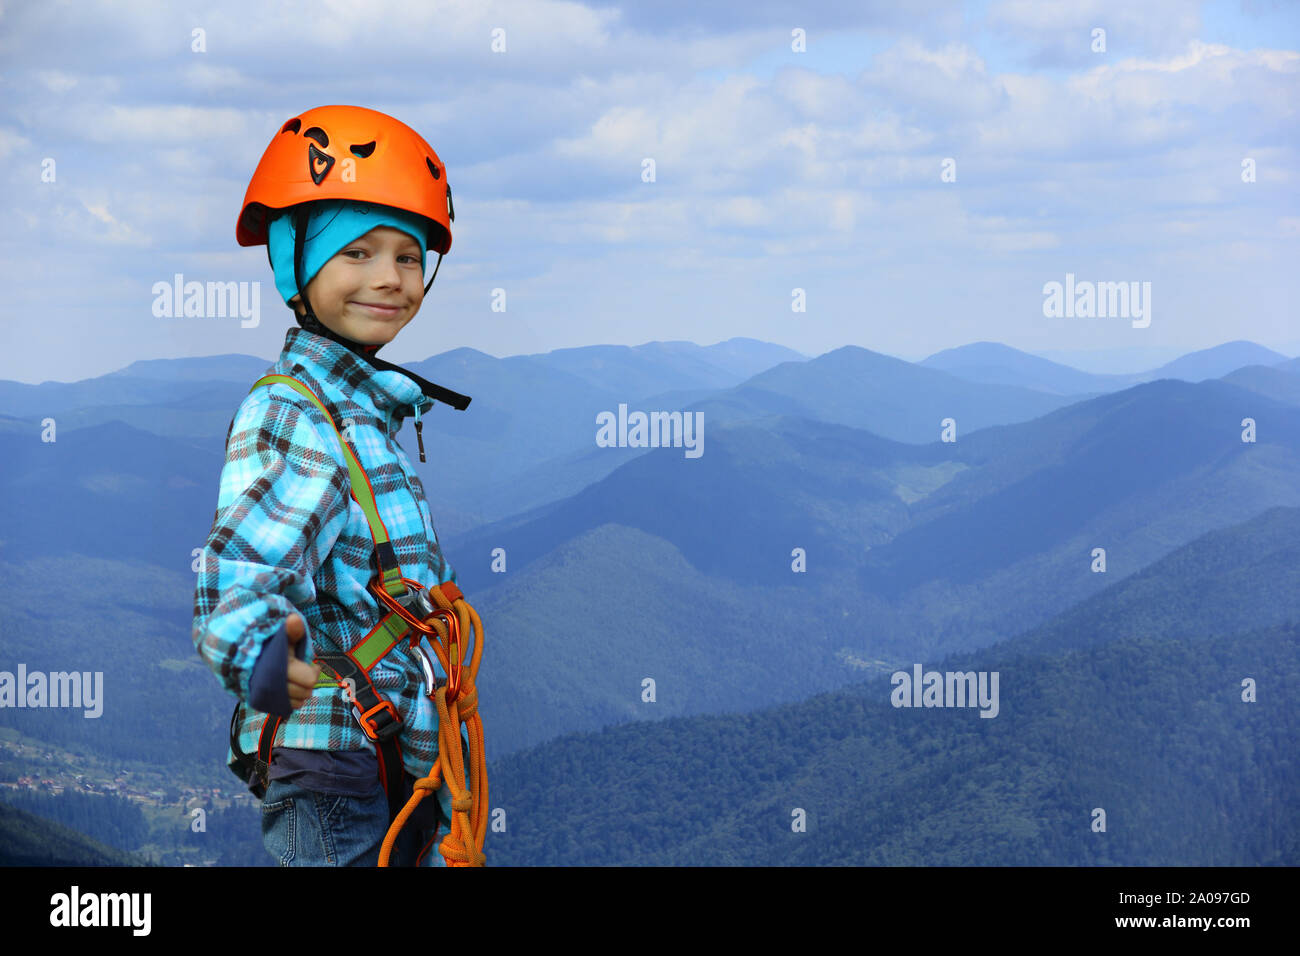 Portrait of a smiling six year old boy wearing helmet and safety harness in mountains, showing like symbol gesture, negative space Stock Photo